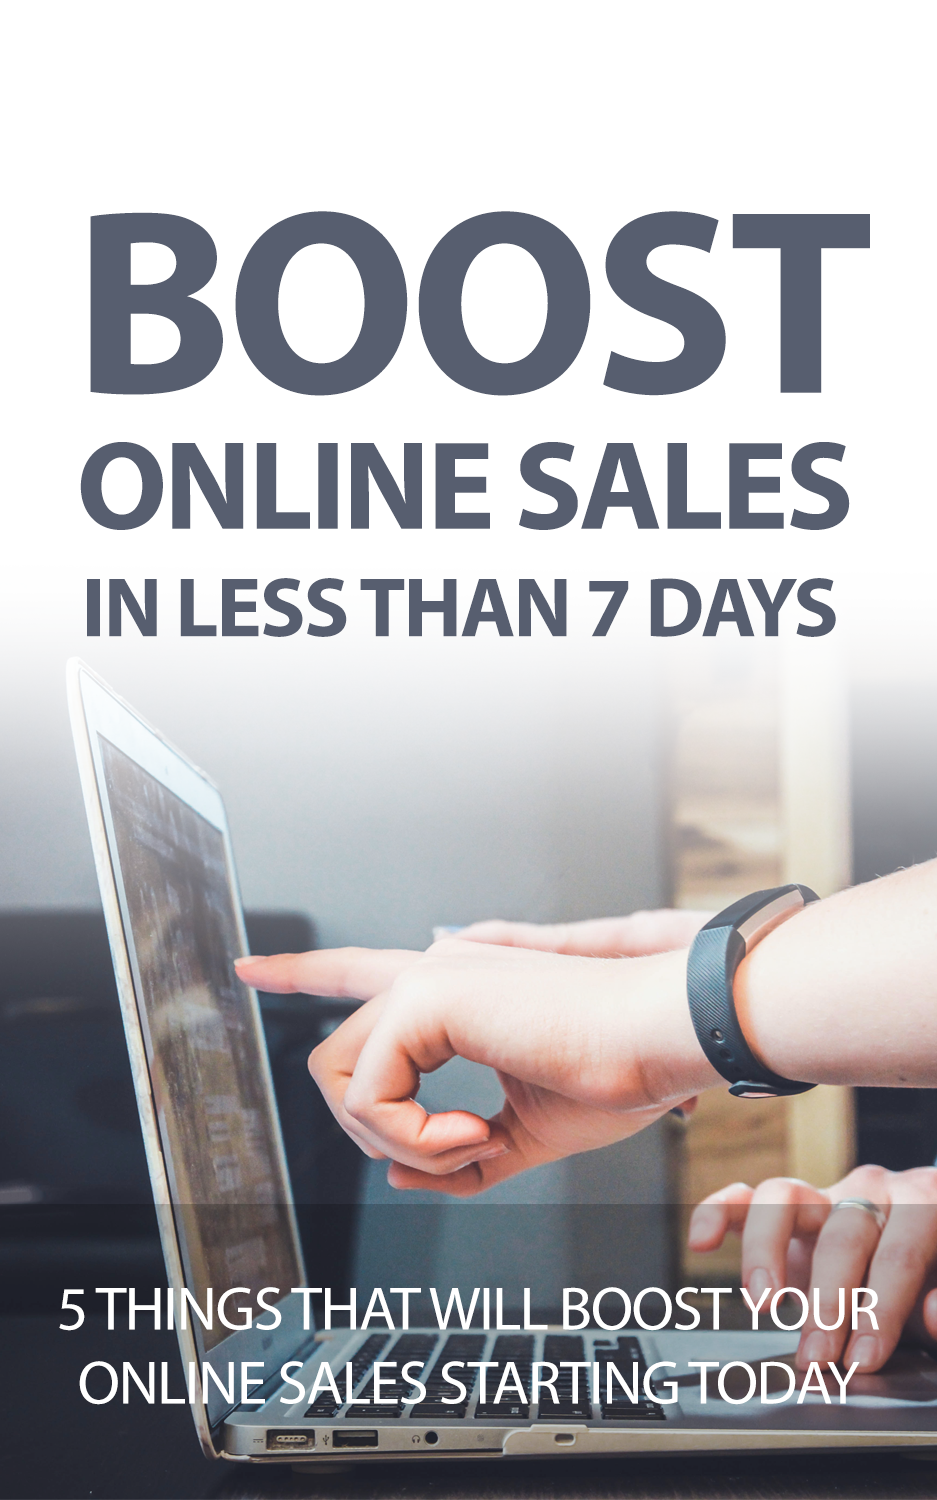 Boost Online Sales In Less Than 7 Days